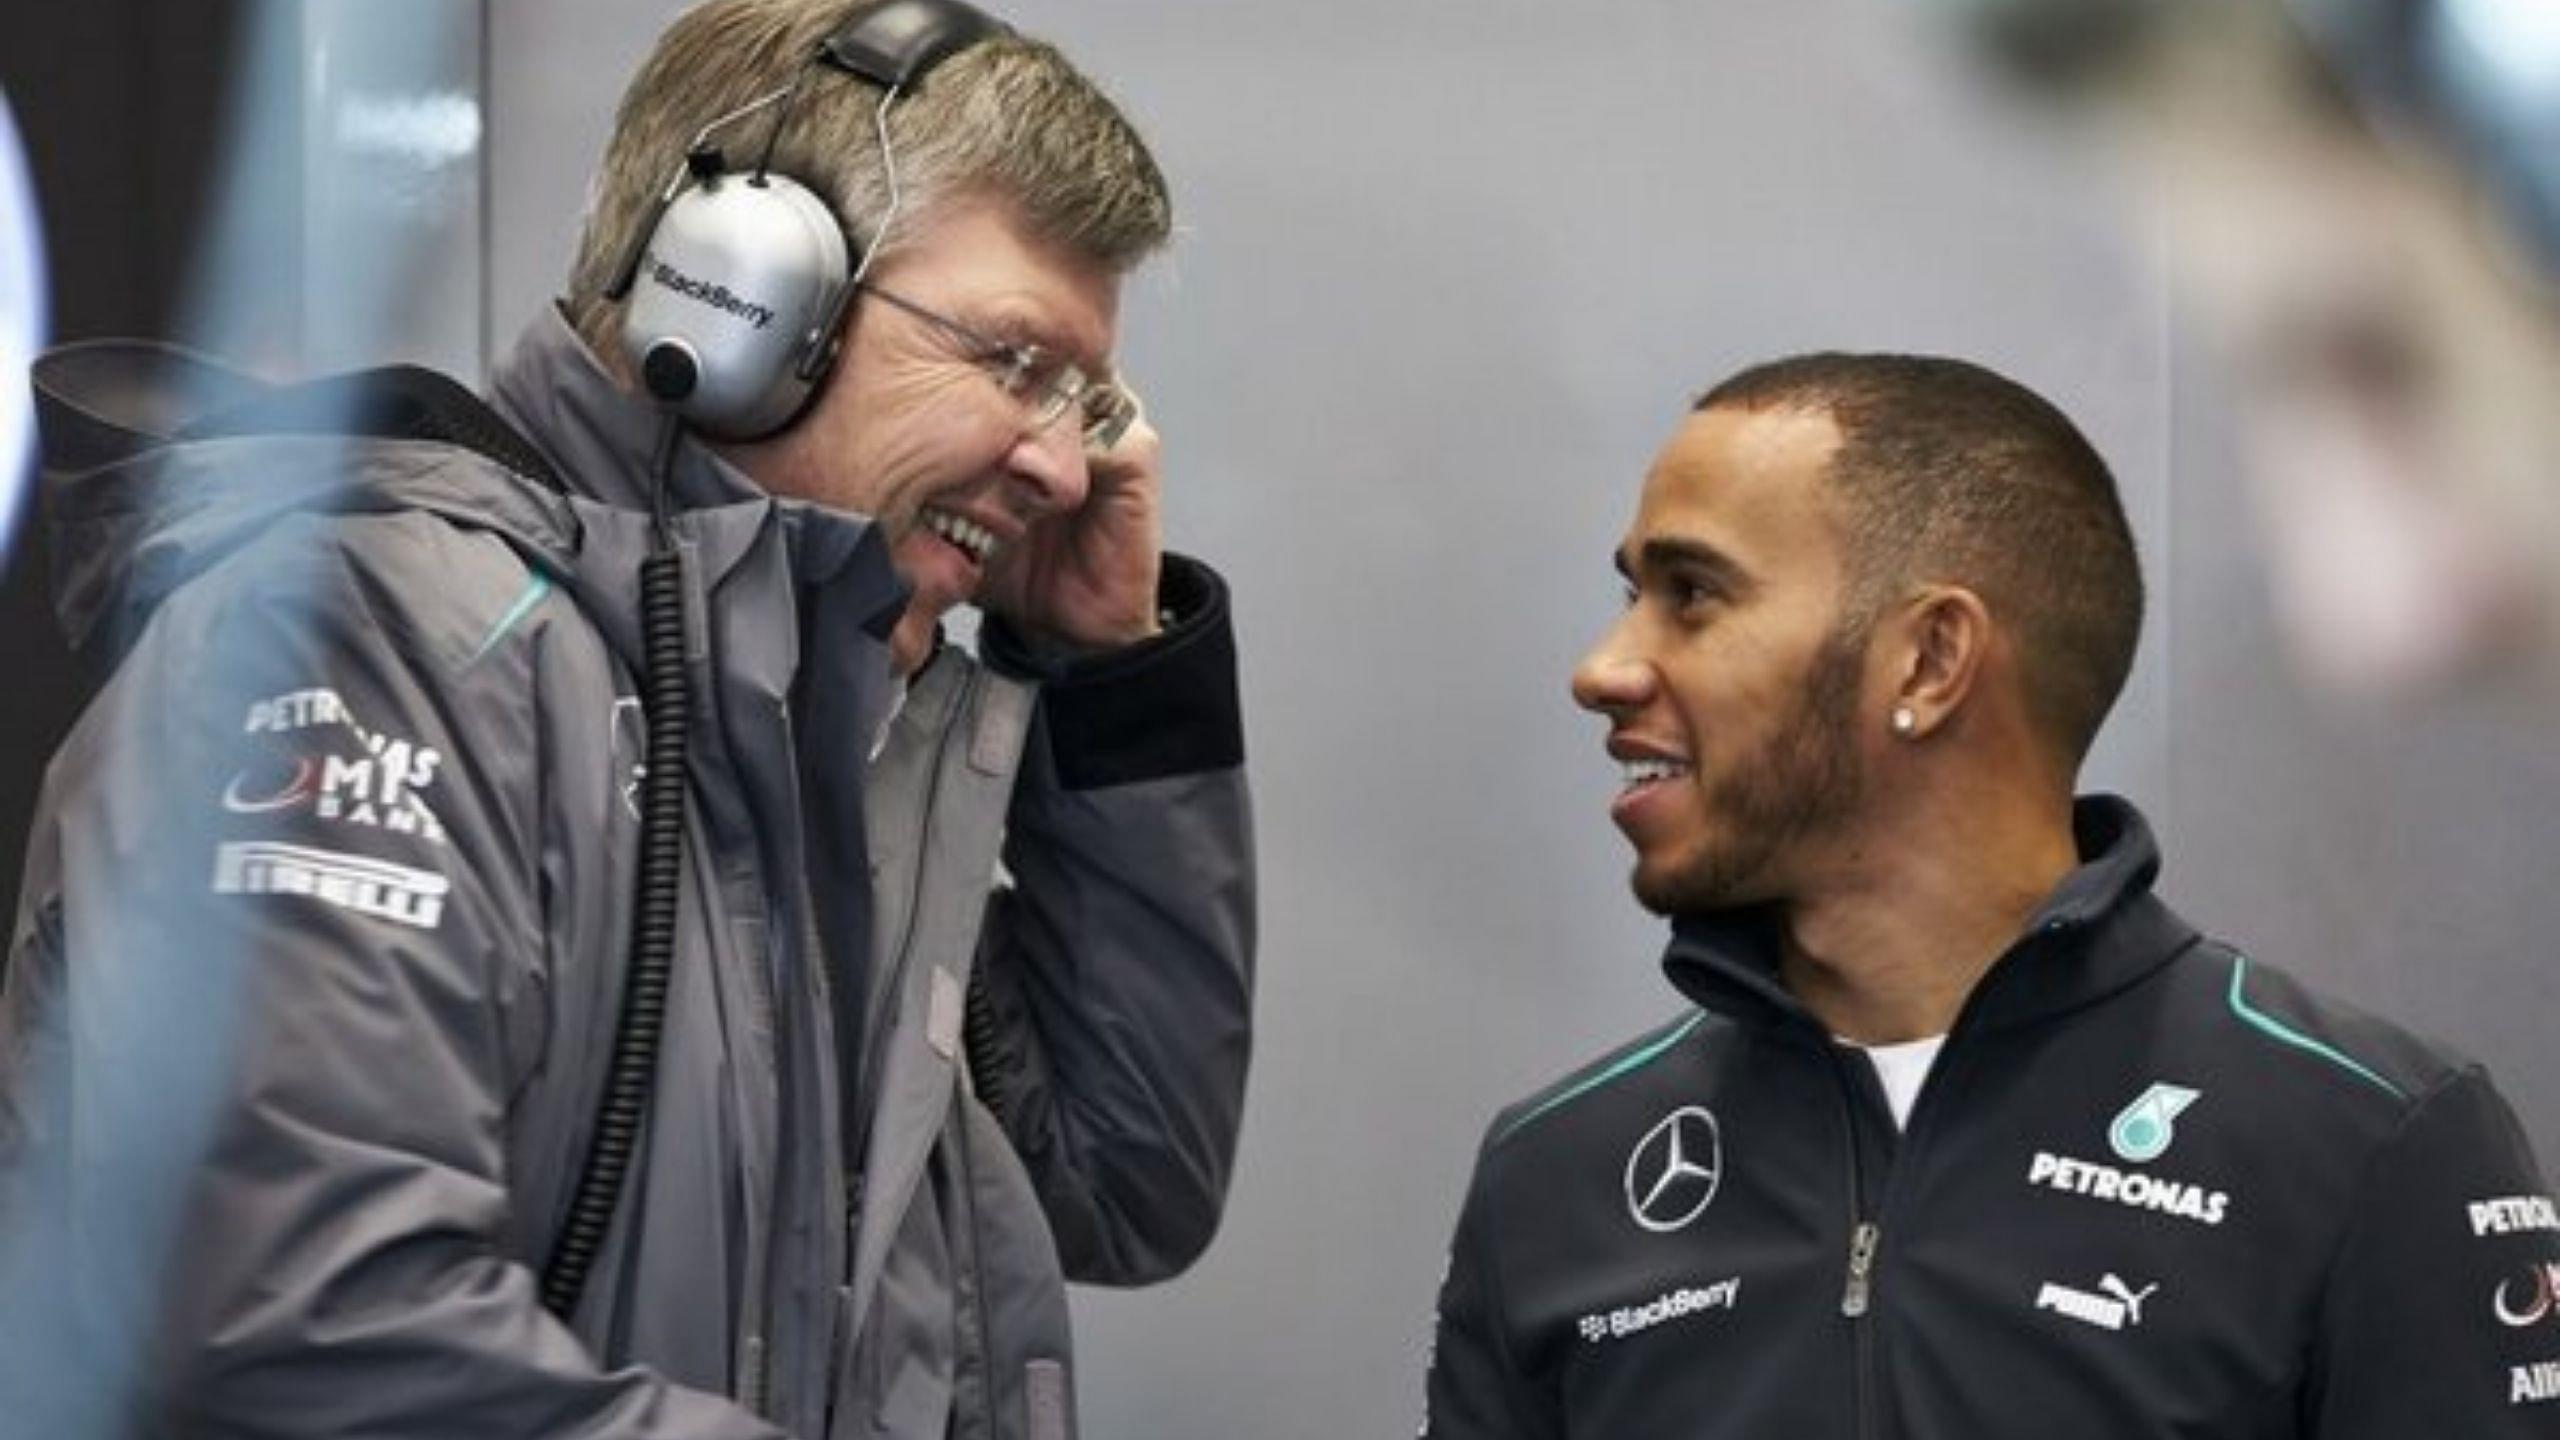 "That is not his style" - Ross Brawn impressed with Lewis Hamilton after he takes podium at Abu Dhabi right after recovering from Covid-19